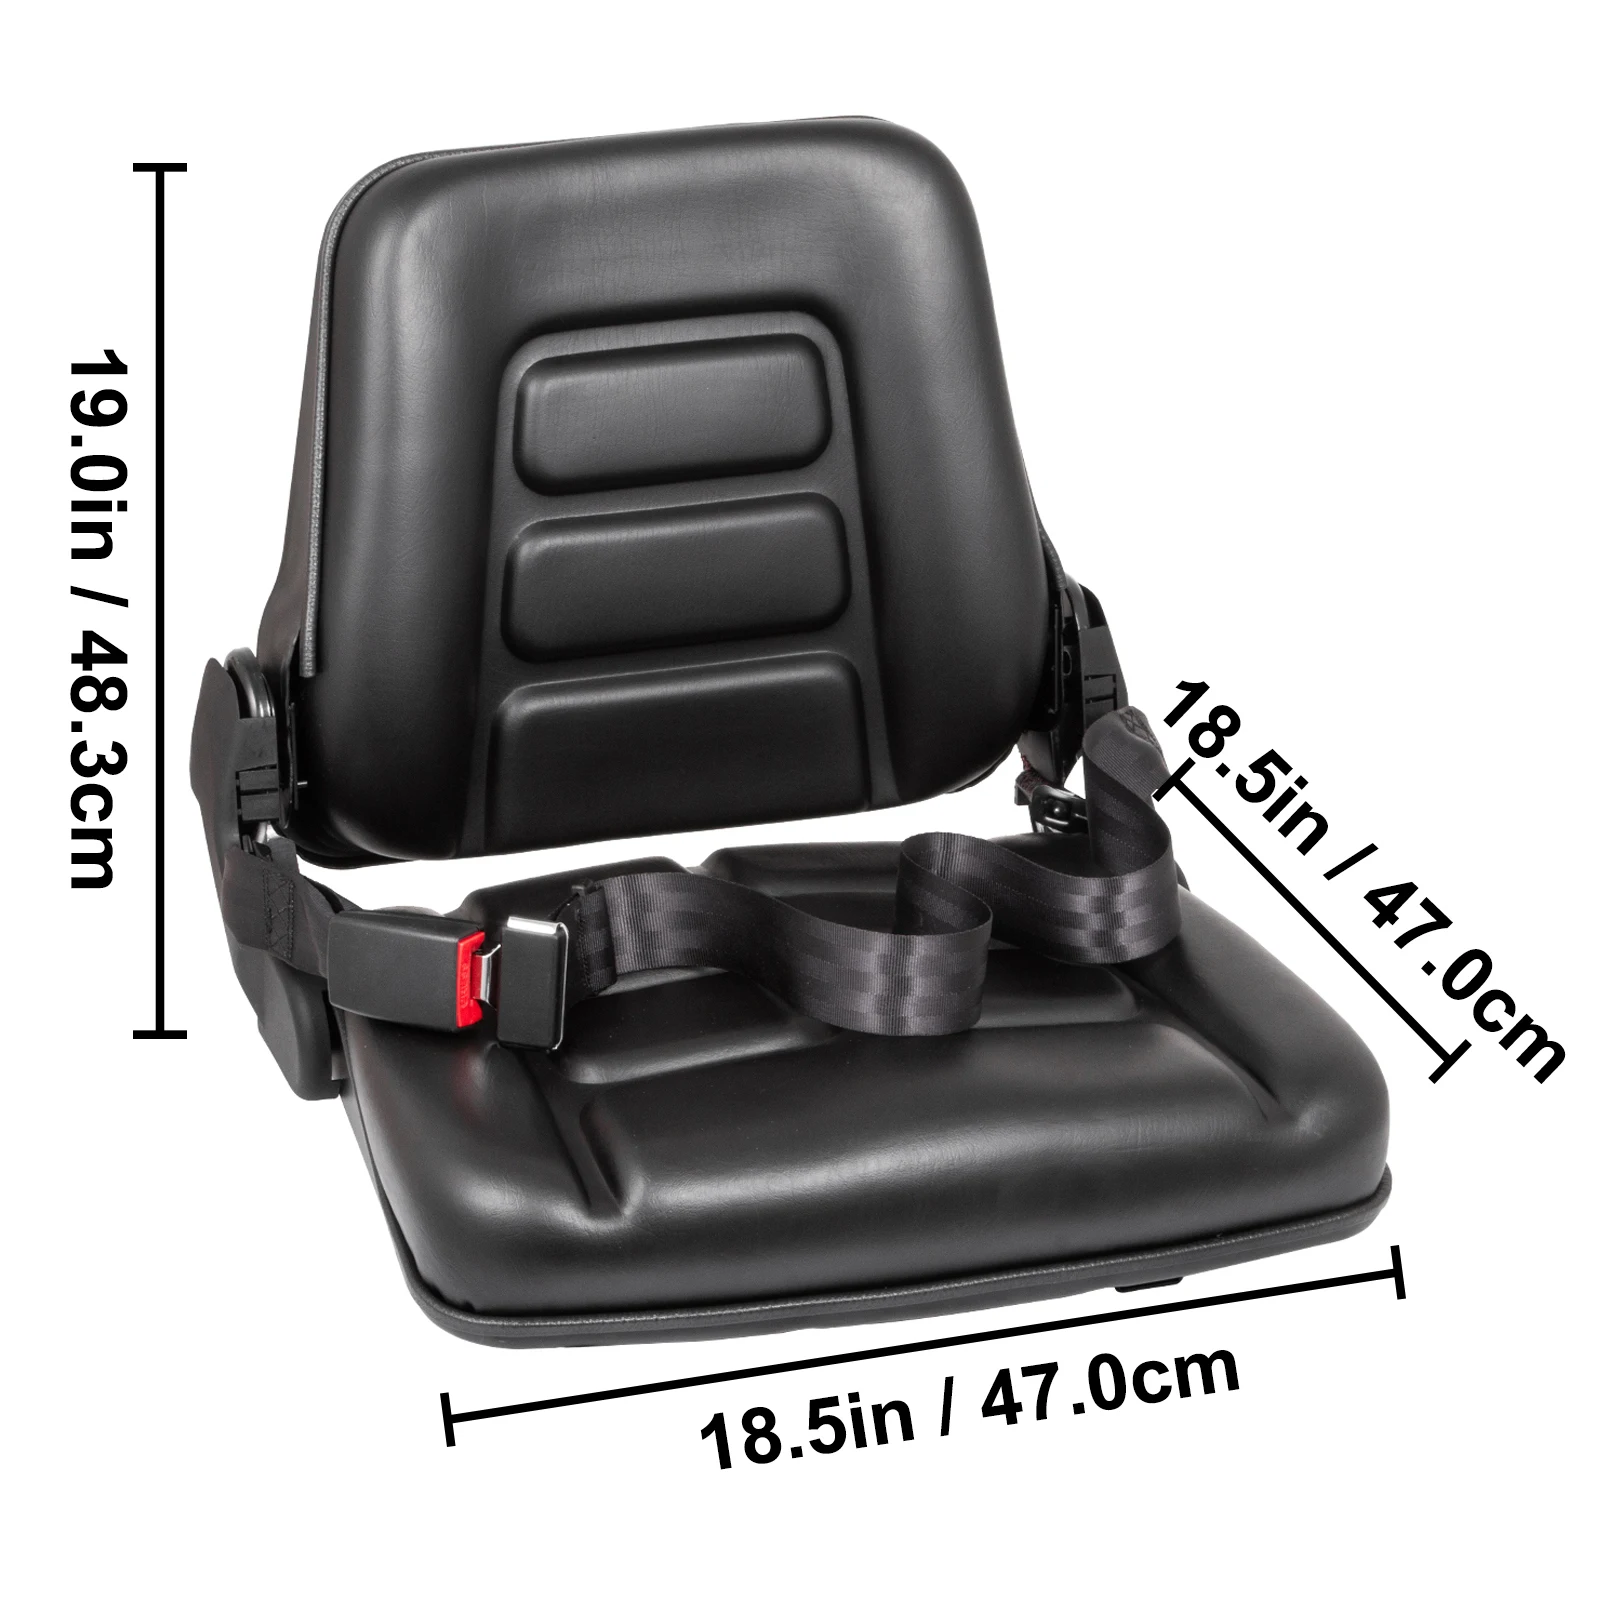 https://ae01.alicdn.com/kf/H05eeec3f37fa483b89442a86f695a3b9z/VEVOR-Universal-Replacement-Seat-Waterproof-High-Quality-PVC-for-Heavy-Mechanical-Seat-Forklift-Dozer-Mower-Tractor.jpg